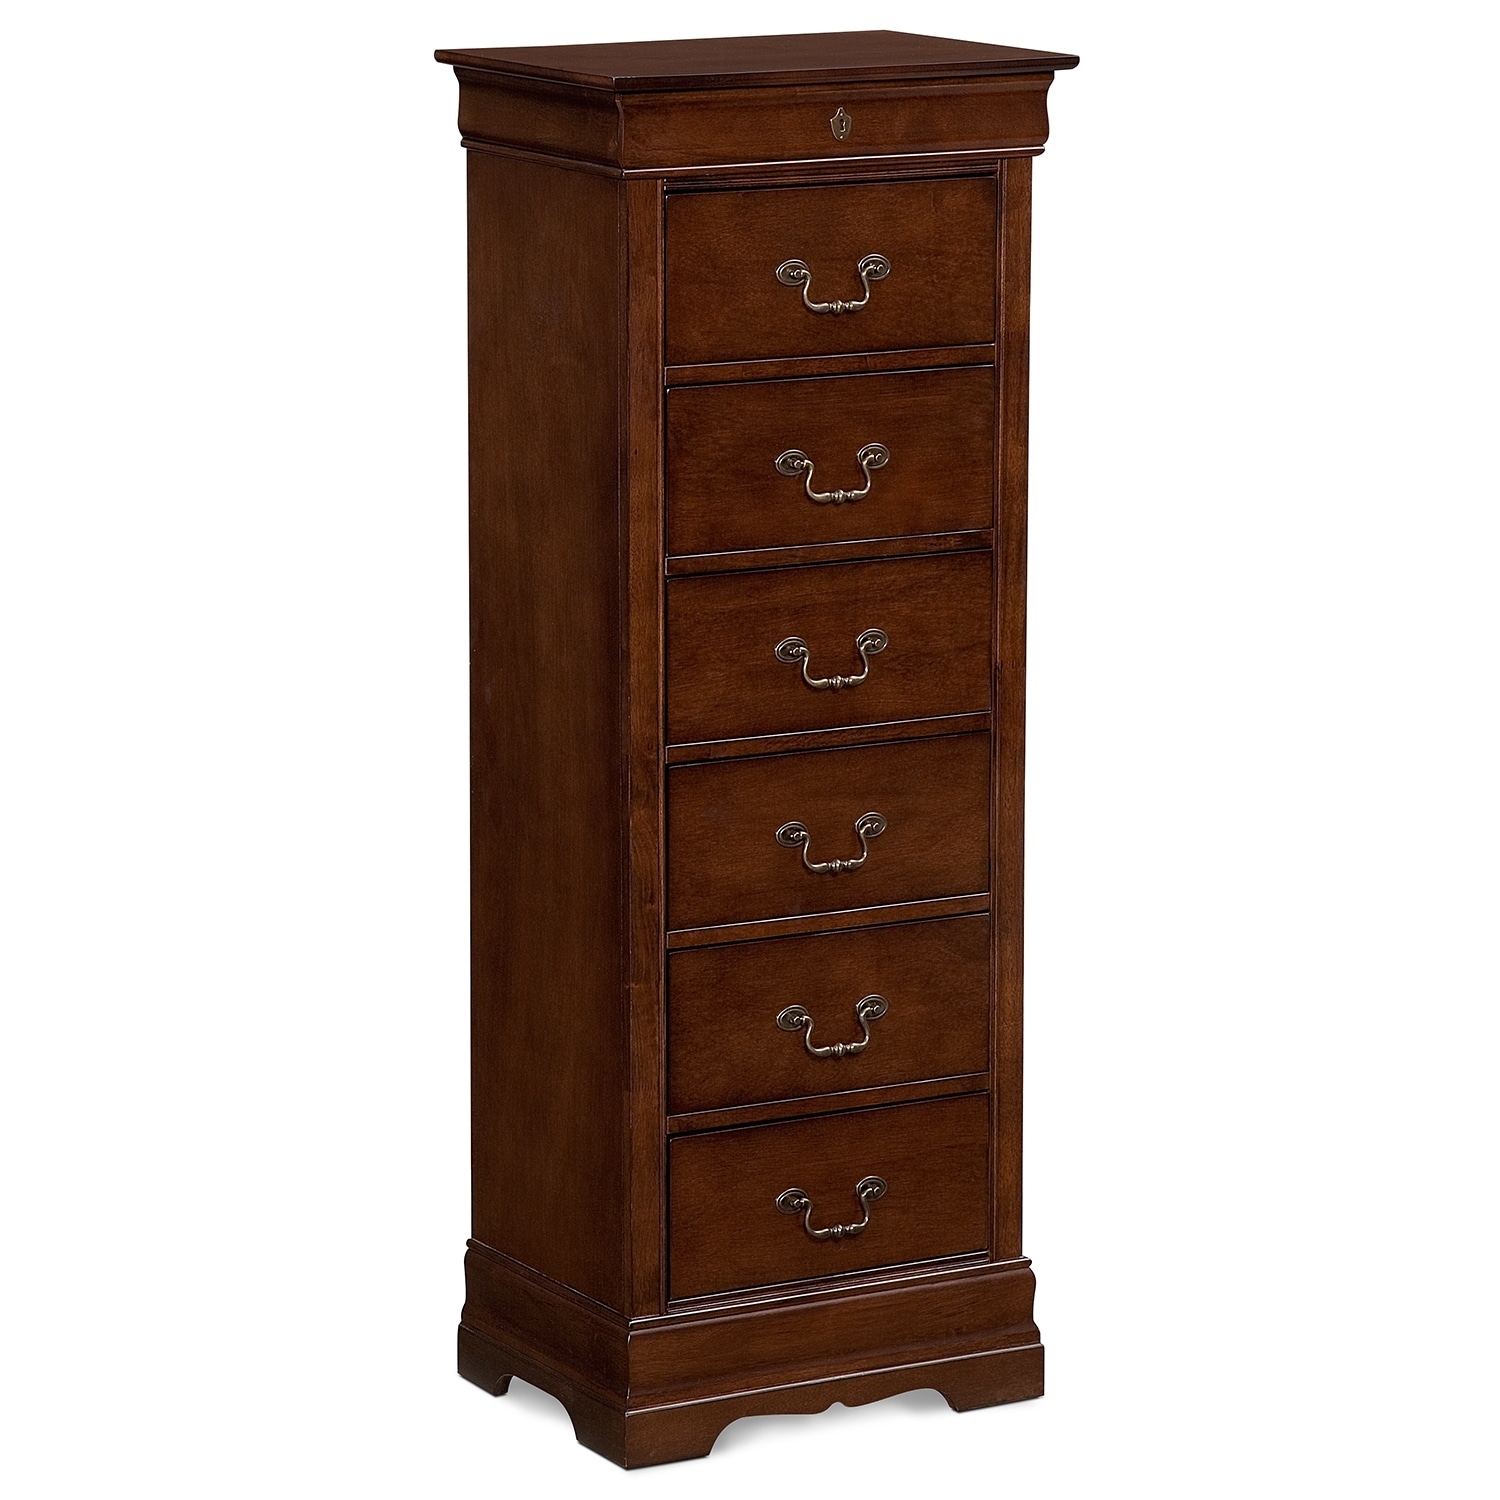 Bedroom furniture neo classic cherry lingerie chest 1